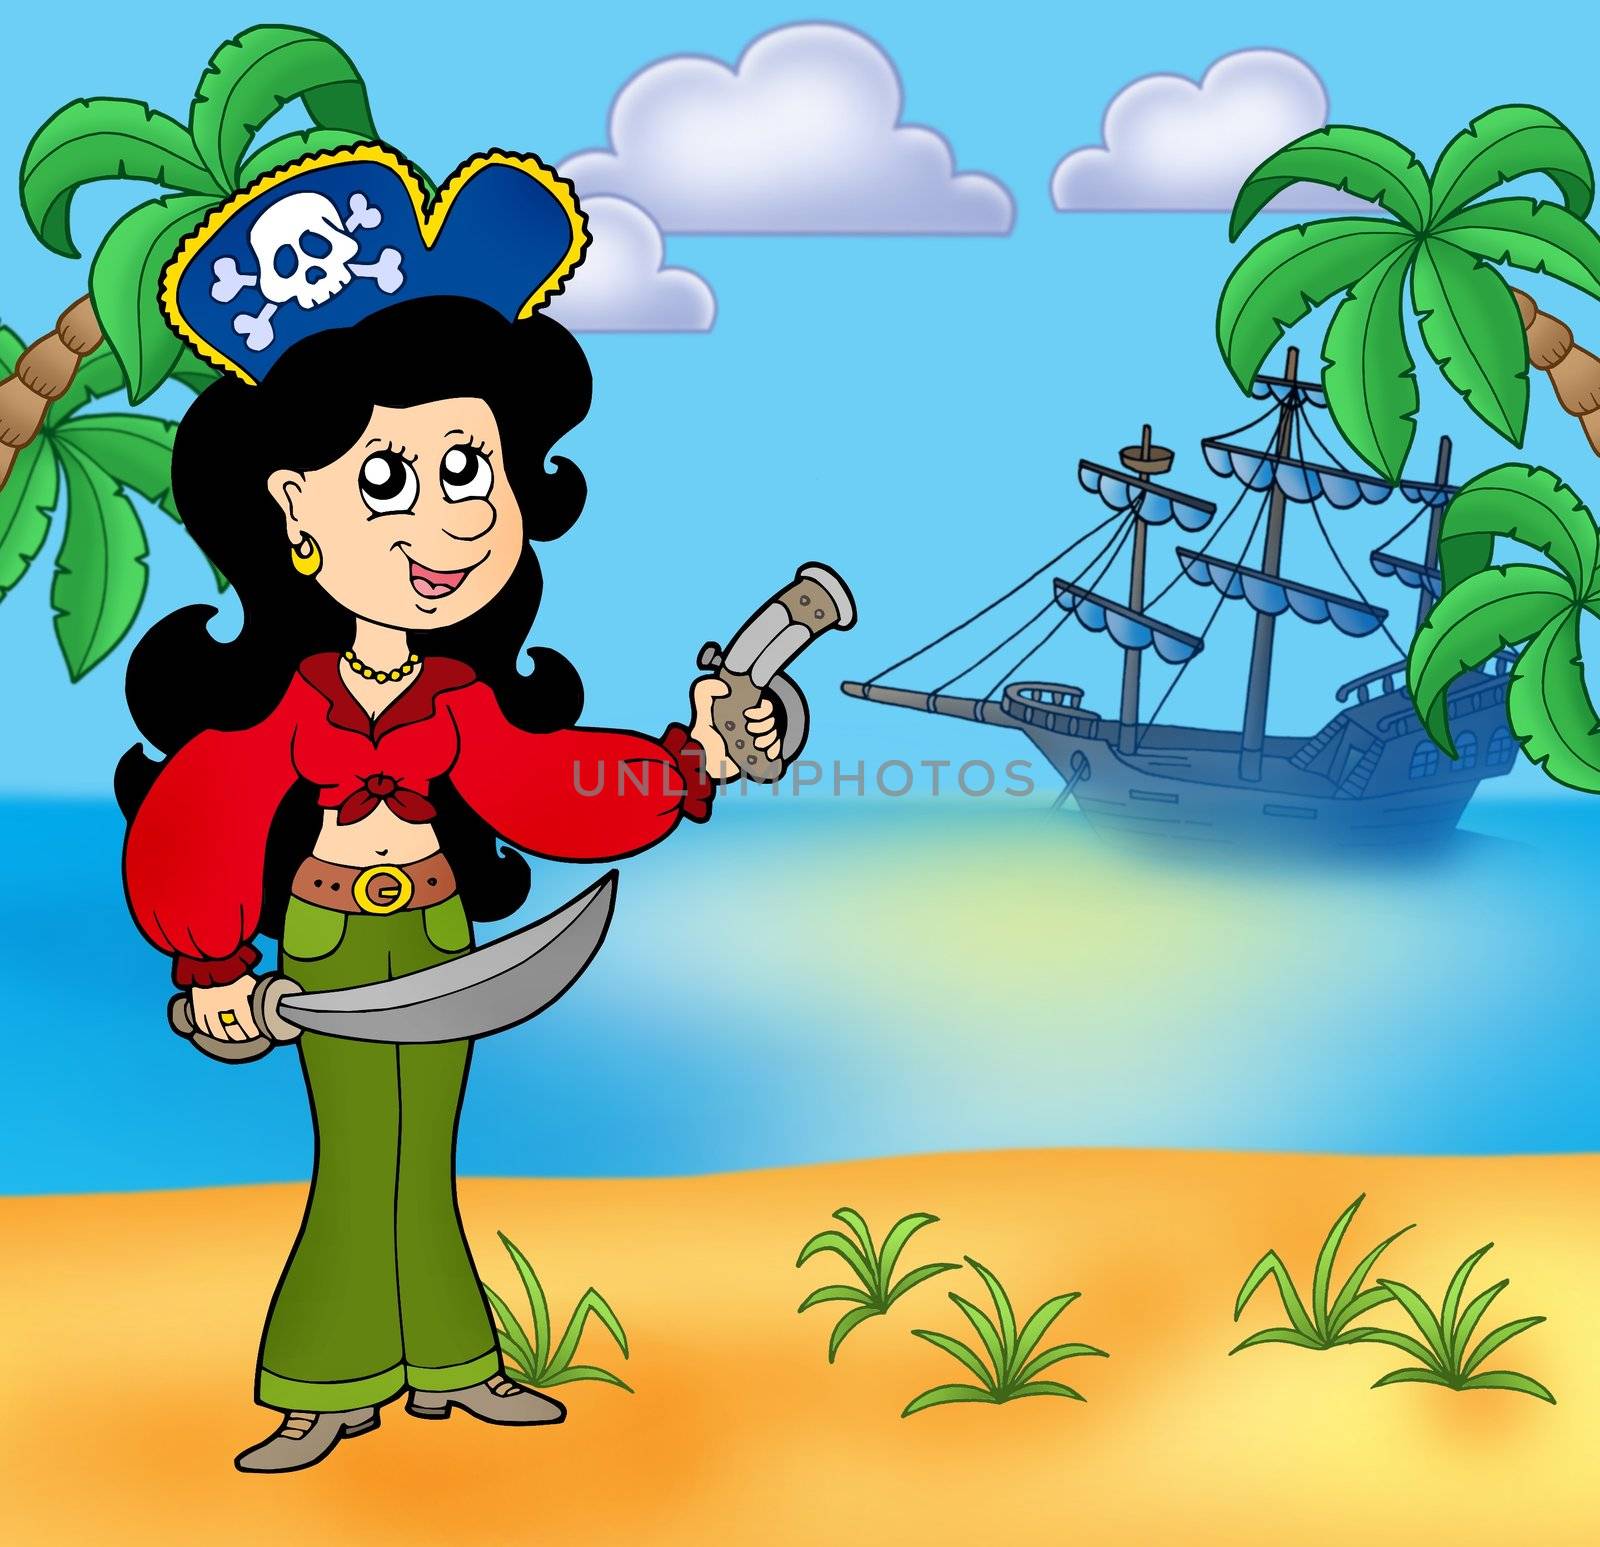 Pirate girl on beach 1 - color illustration.